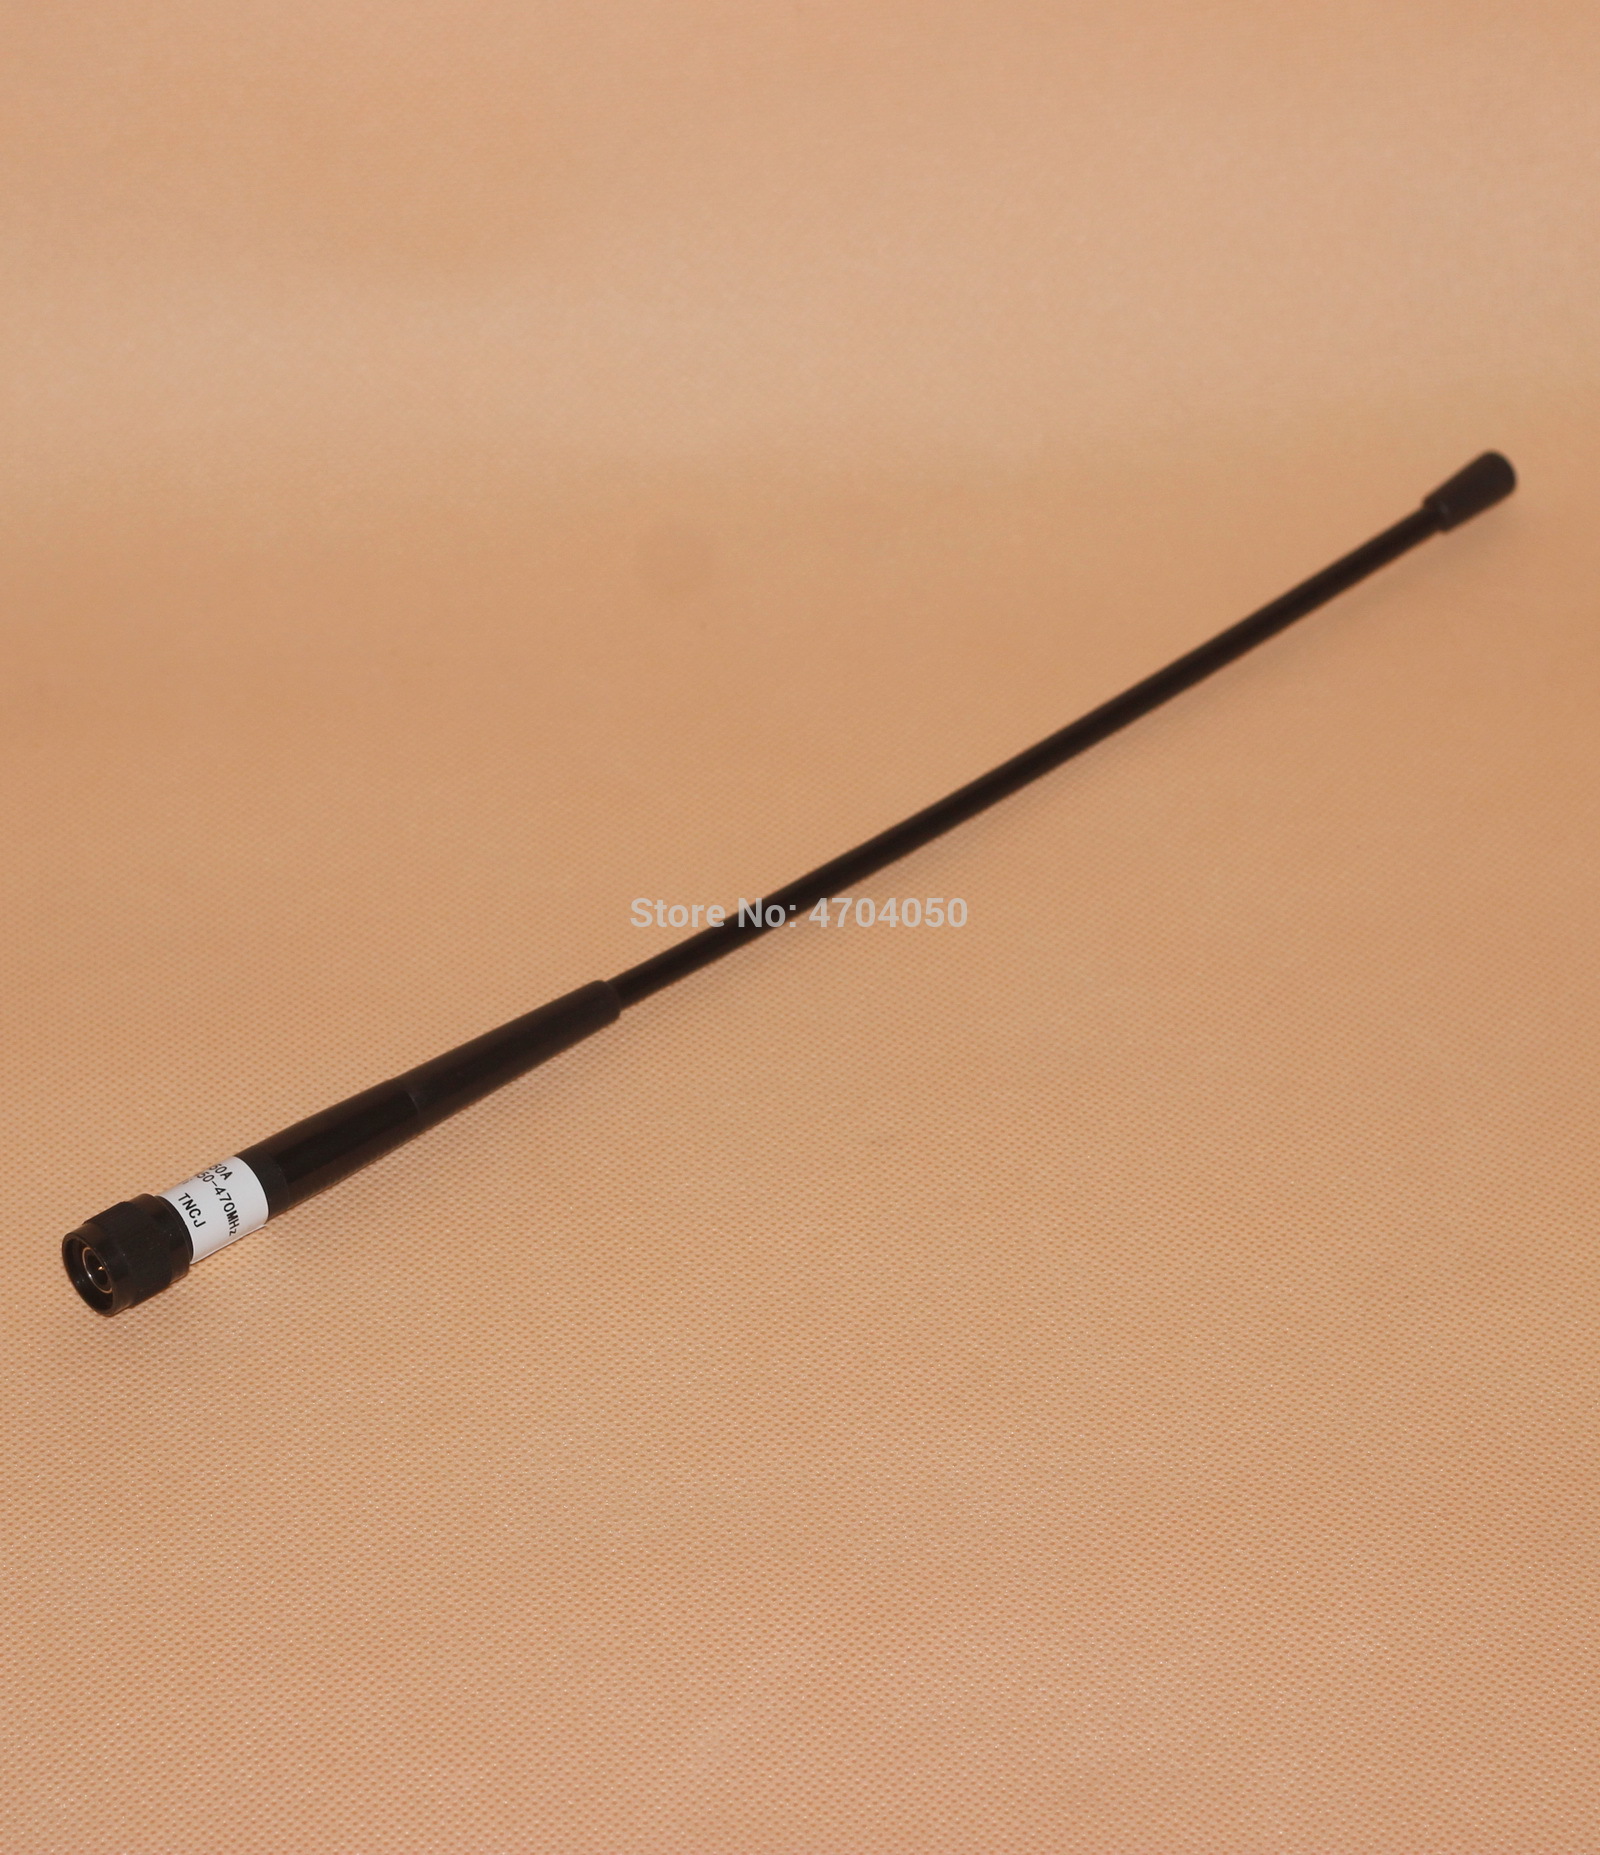 New Black Soft rod Antenna 450-470MHz High Frequency for leica Trimble Topcon South GPS Surveying Instruments, with TNC port